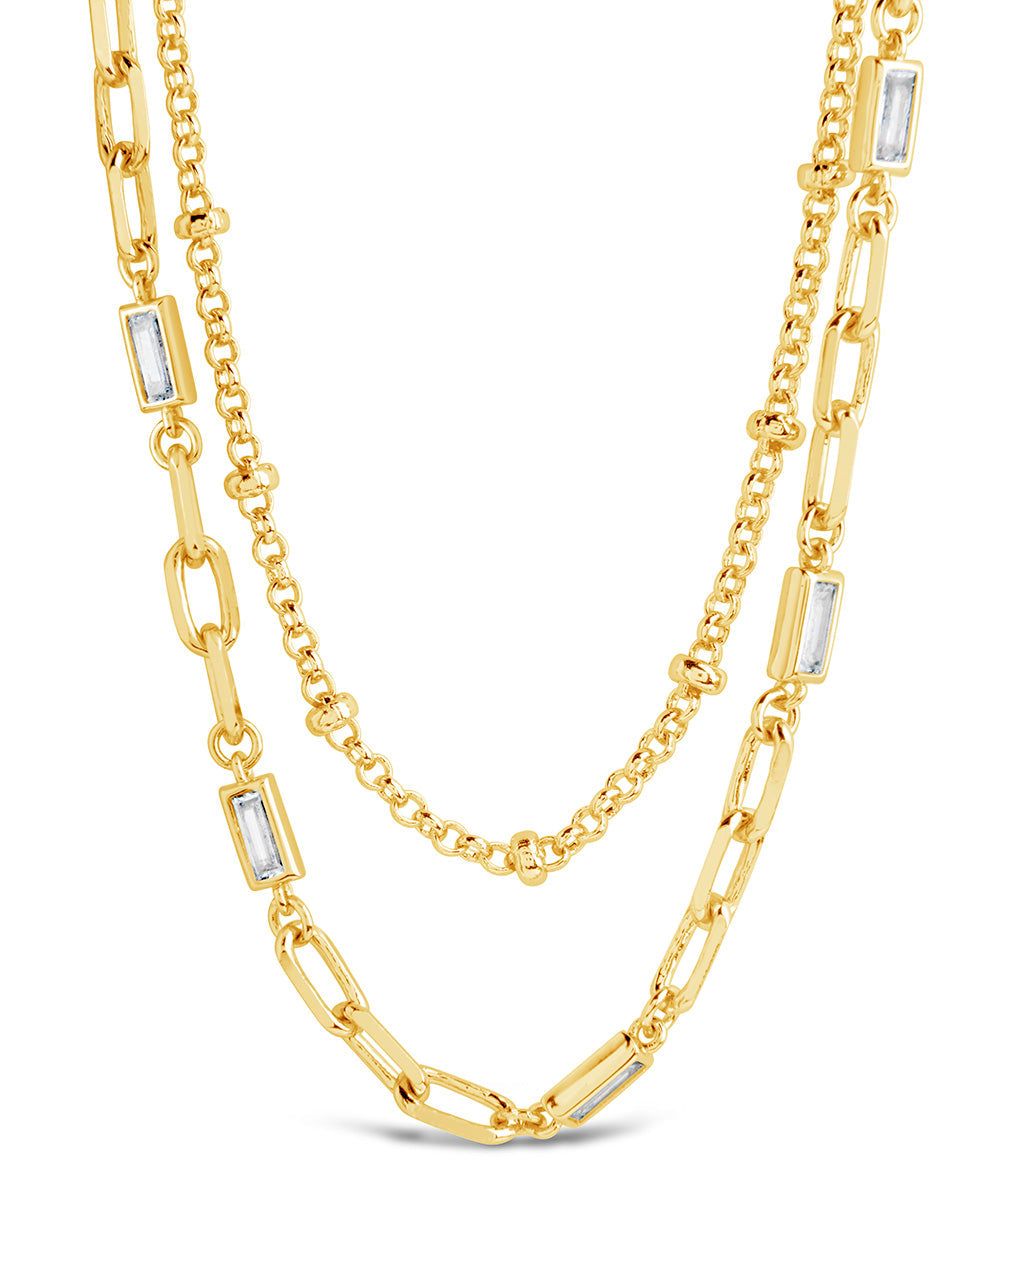 Palmer Layered Necklace Necklace Sterling Forever Gold 